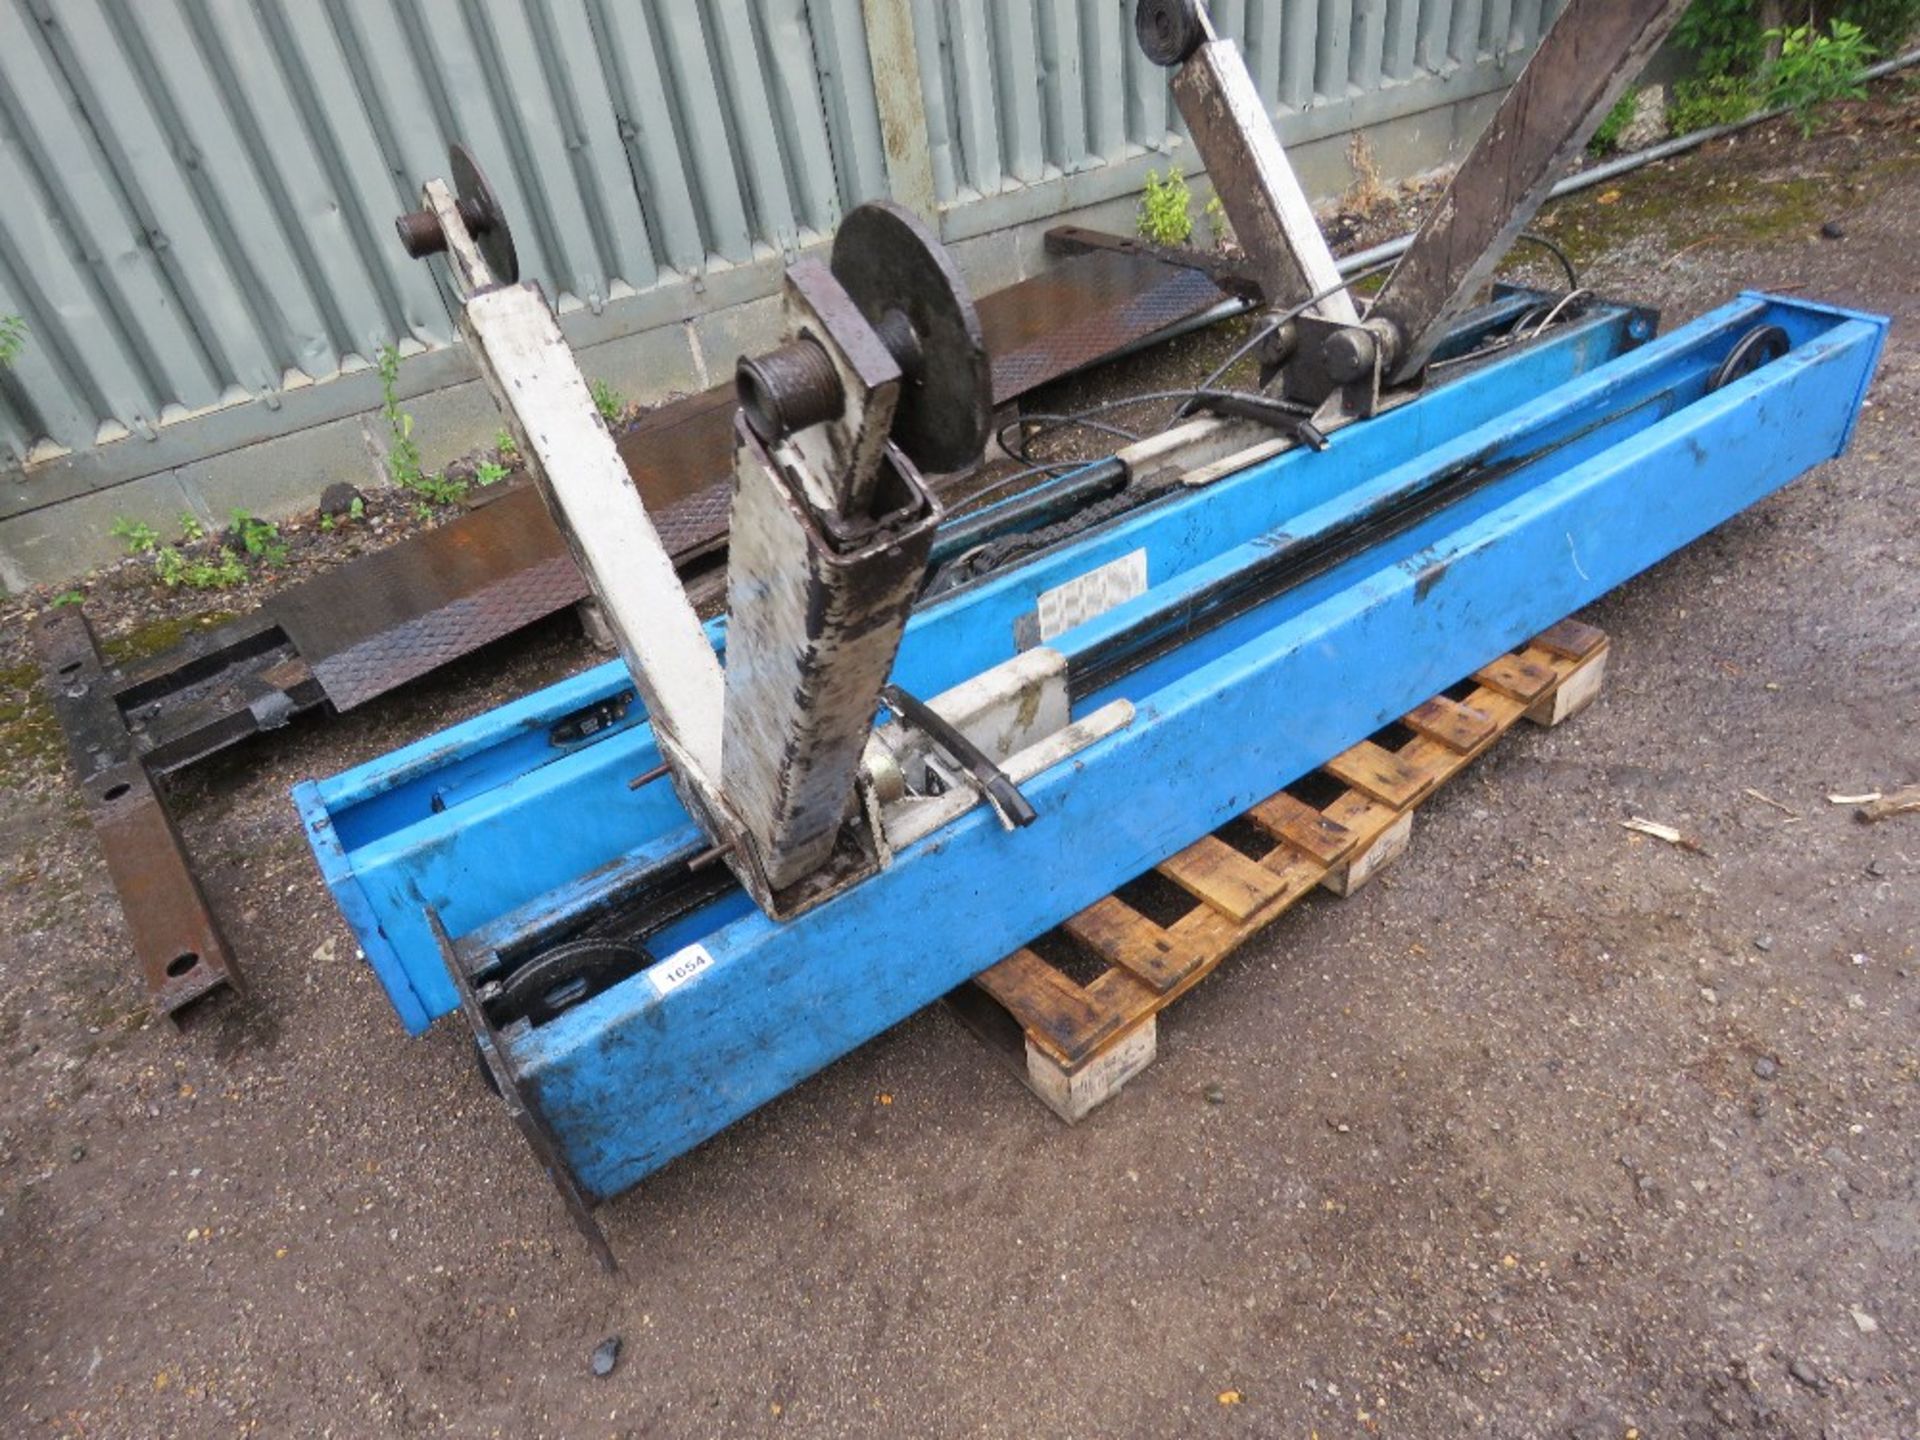 HOFFMAN 2800KG RATED 2 POST VEHICLE LIFT. WORKING WHEN RECENTLY REMOVED FROM WORKSHOP LIQUIDATION. - Image 2 of 4